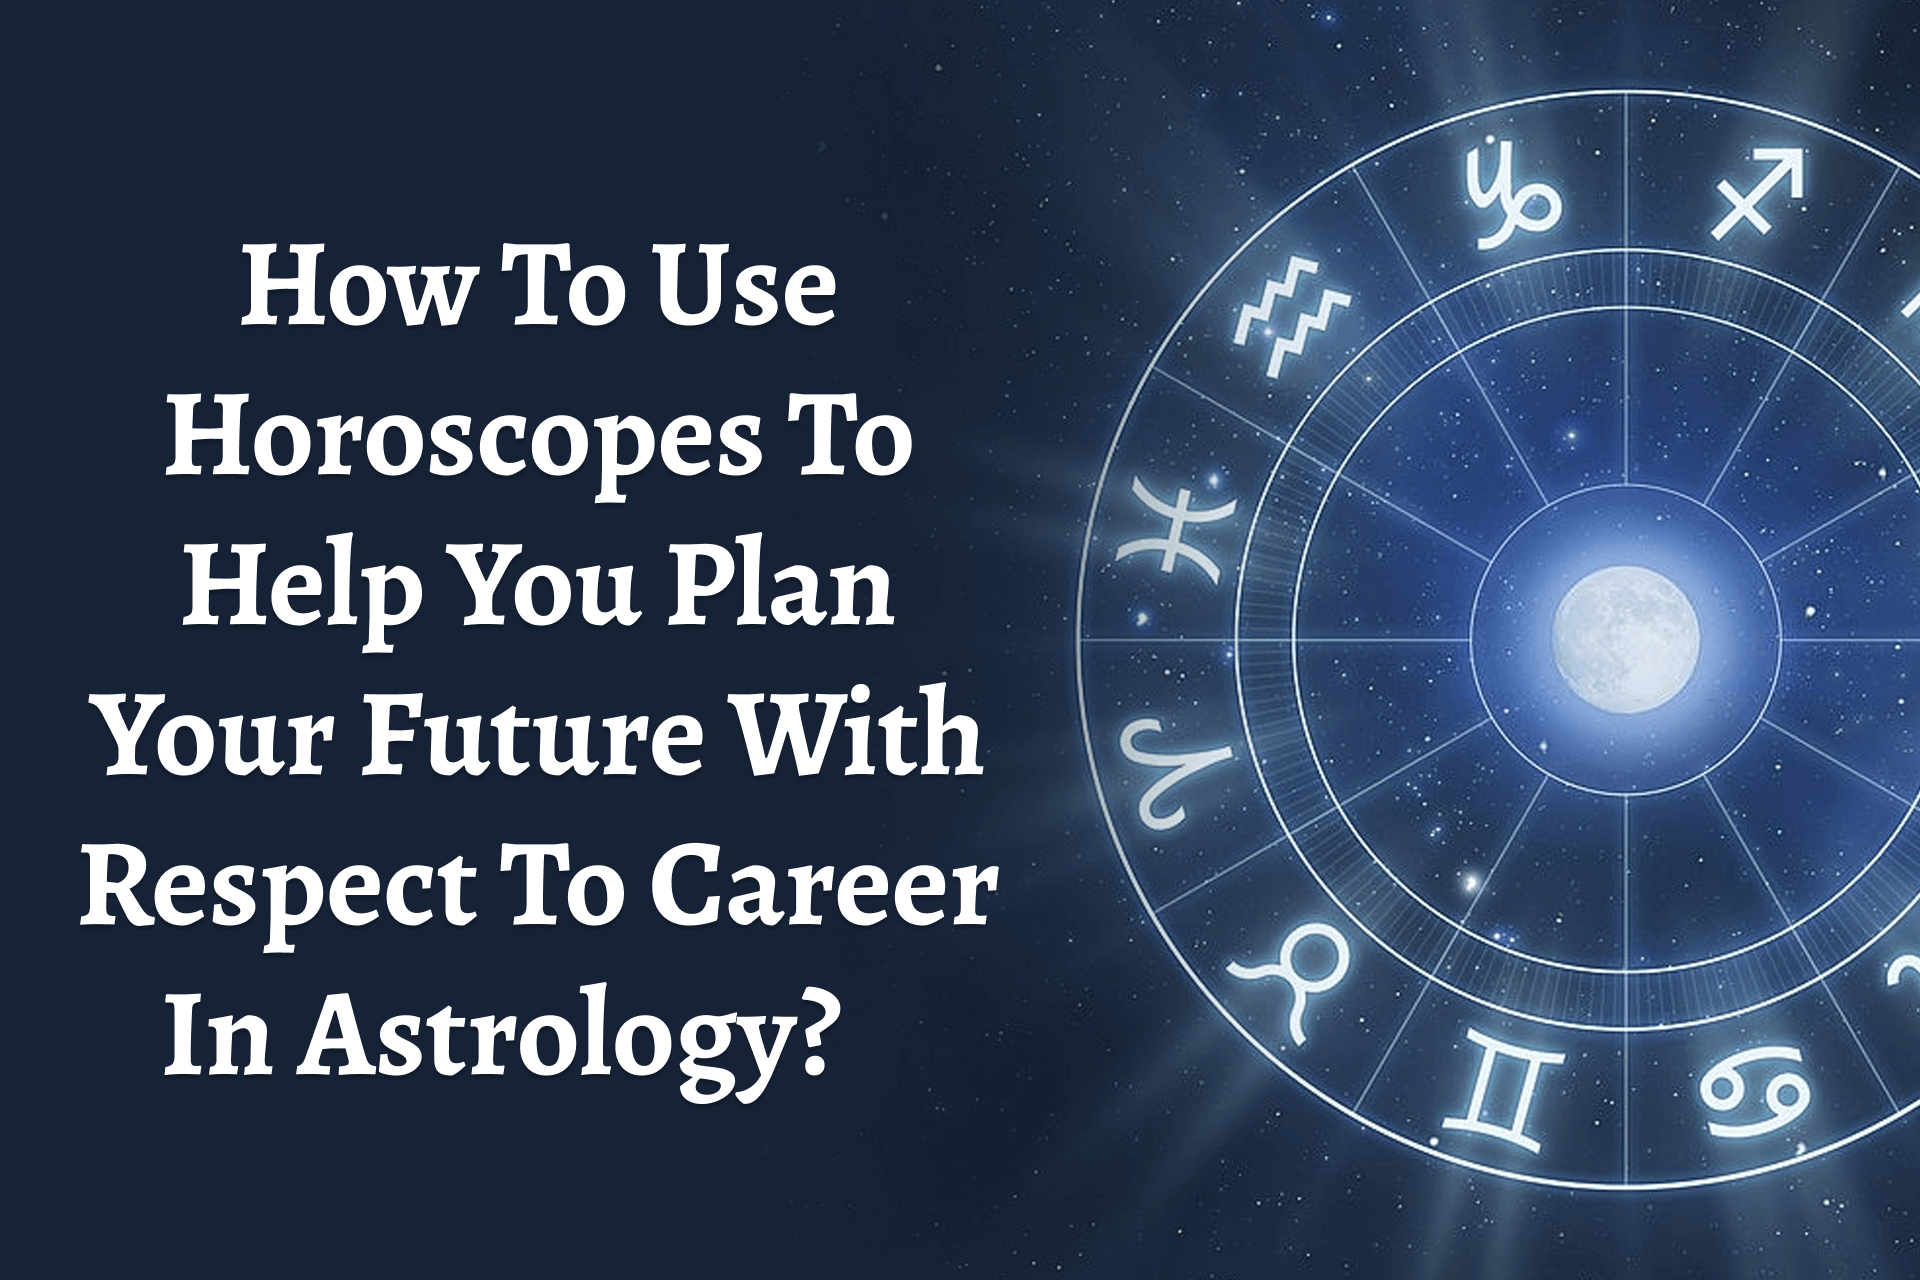 How To Use Horoscopes To Help You Plan Your Future With Respect To Career In Astrology?